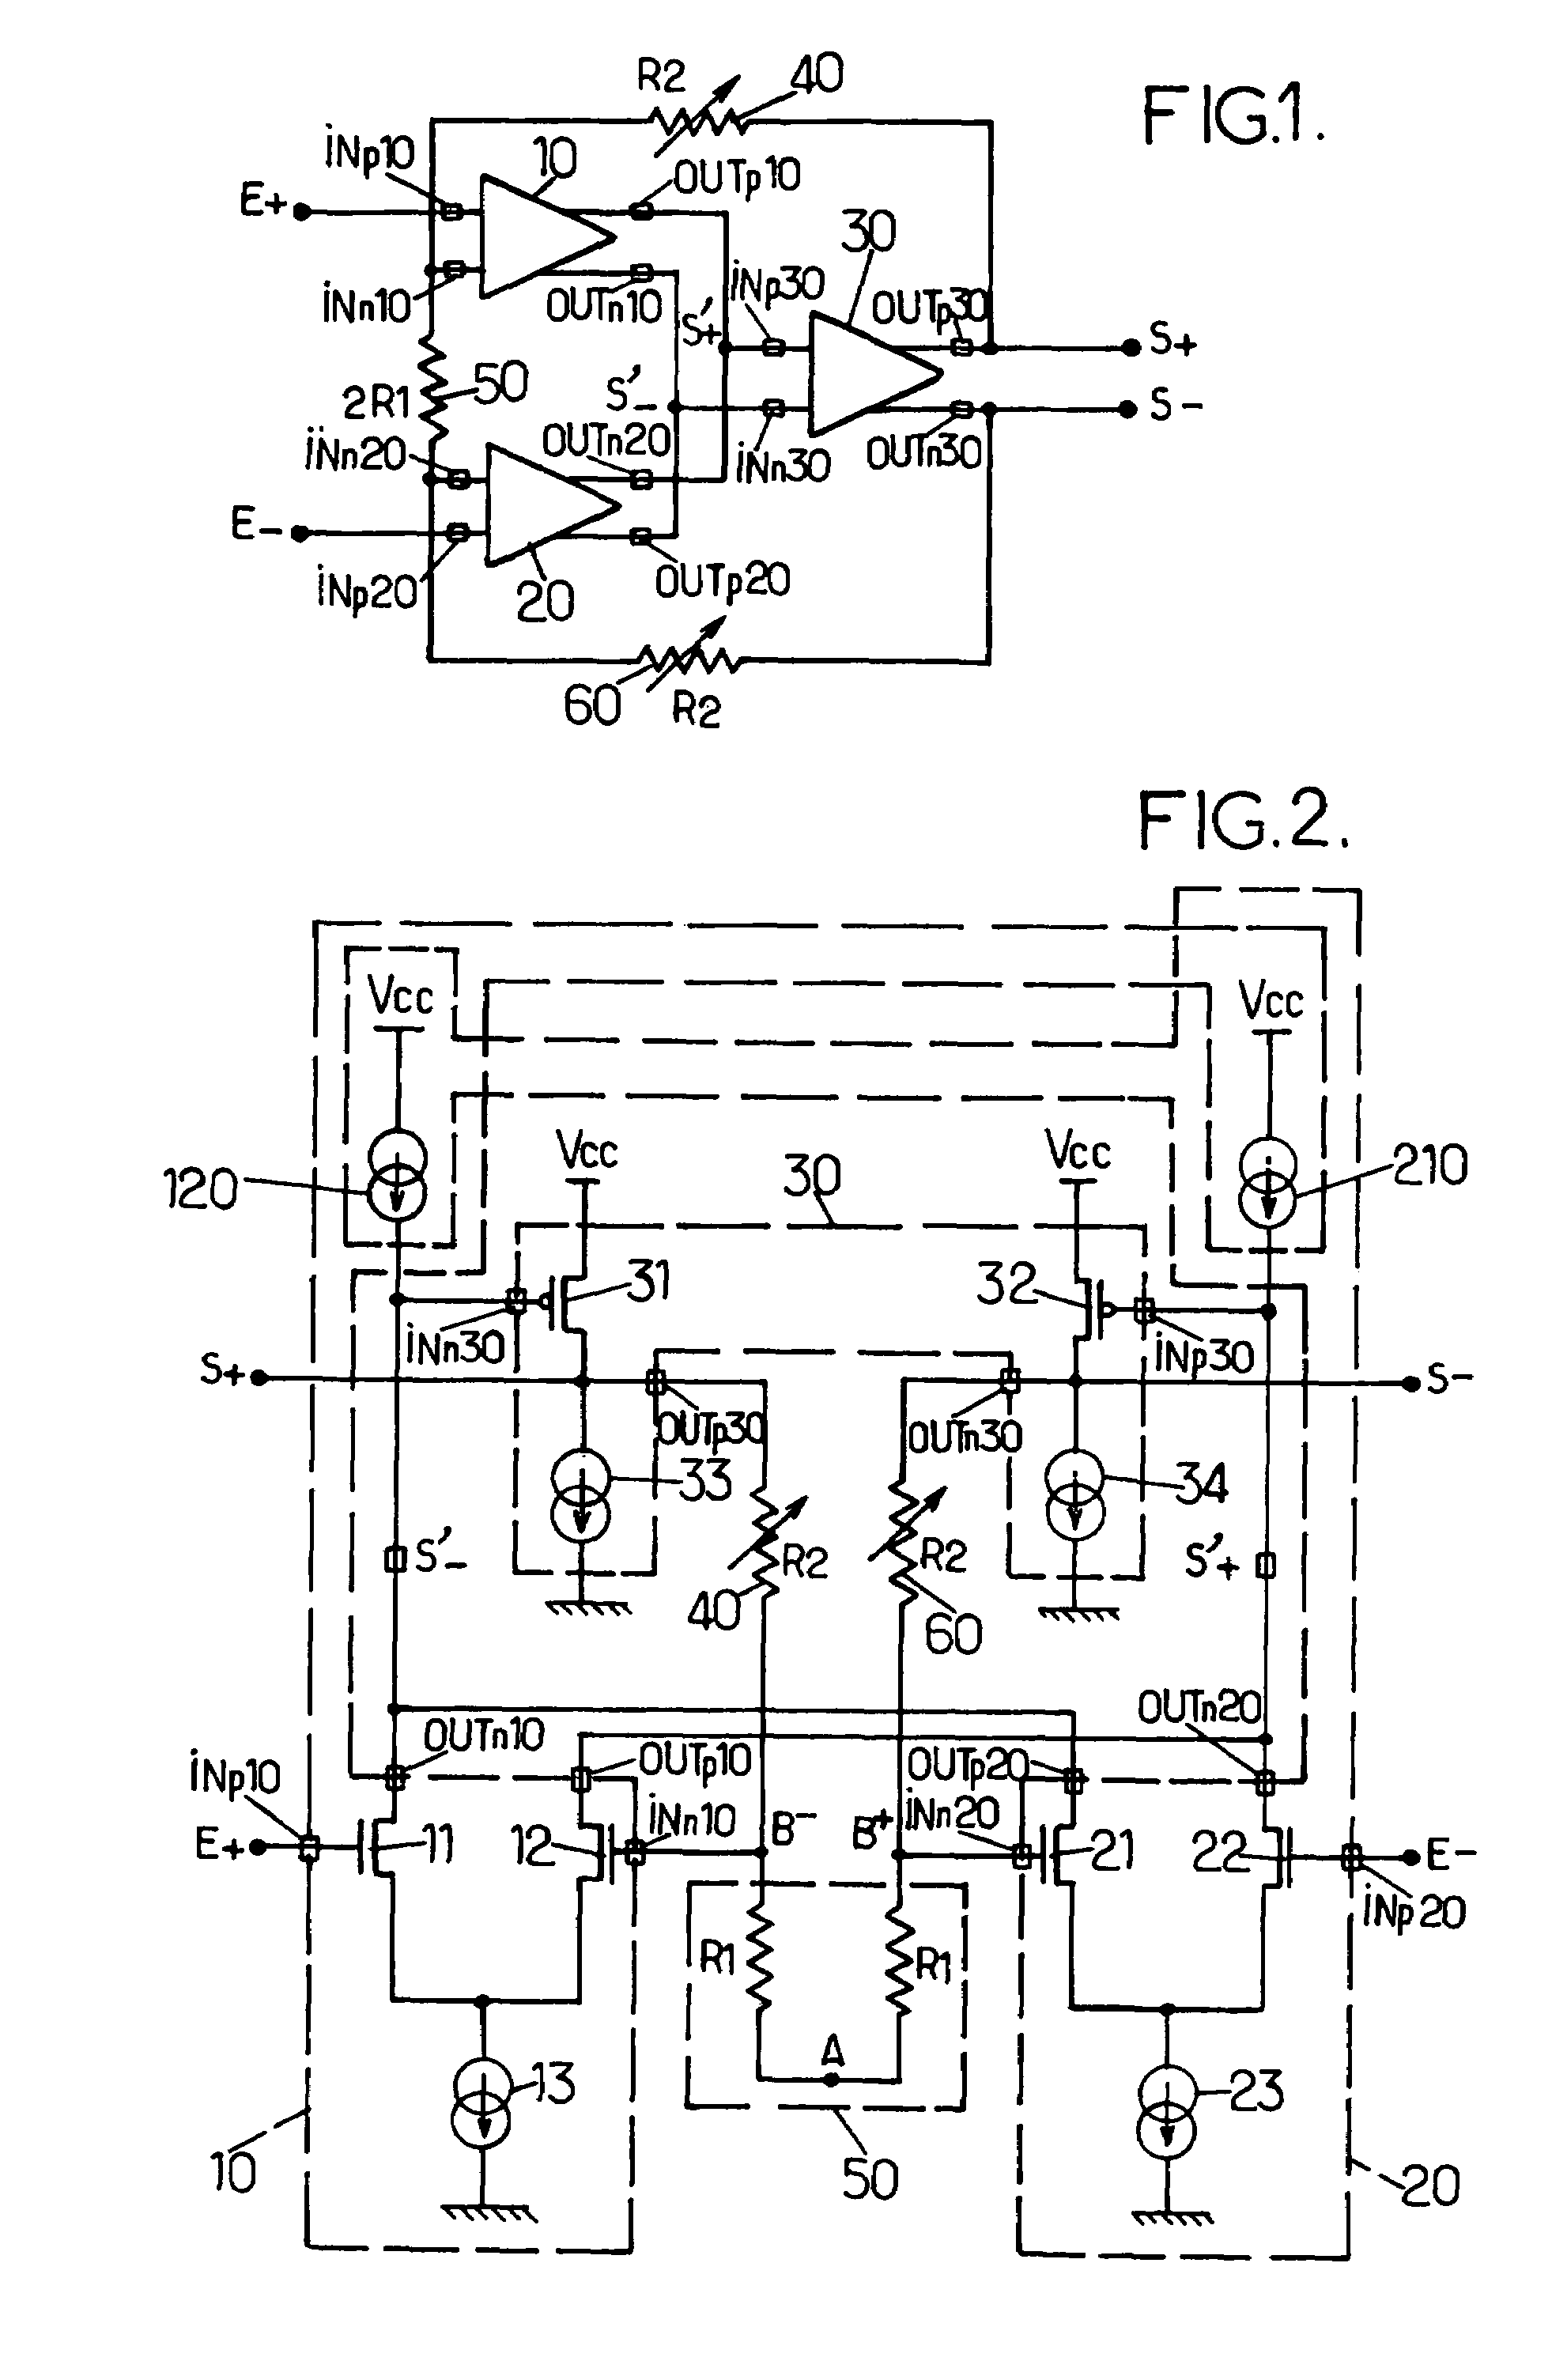 Variable-gain differential amplifier